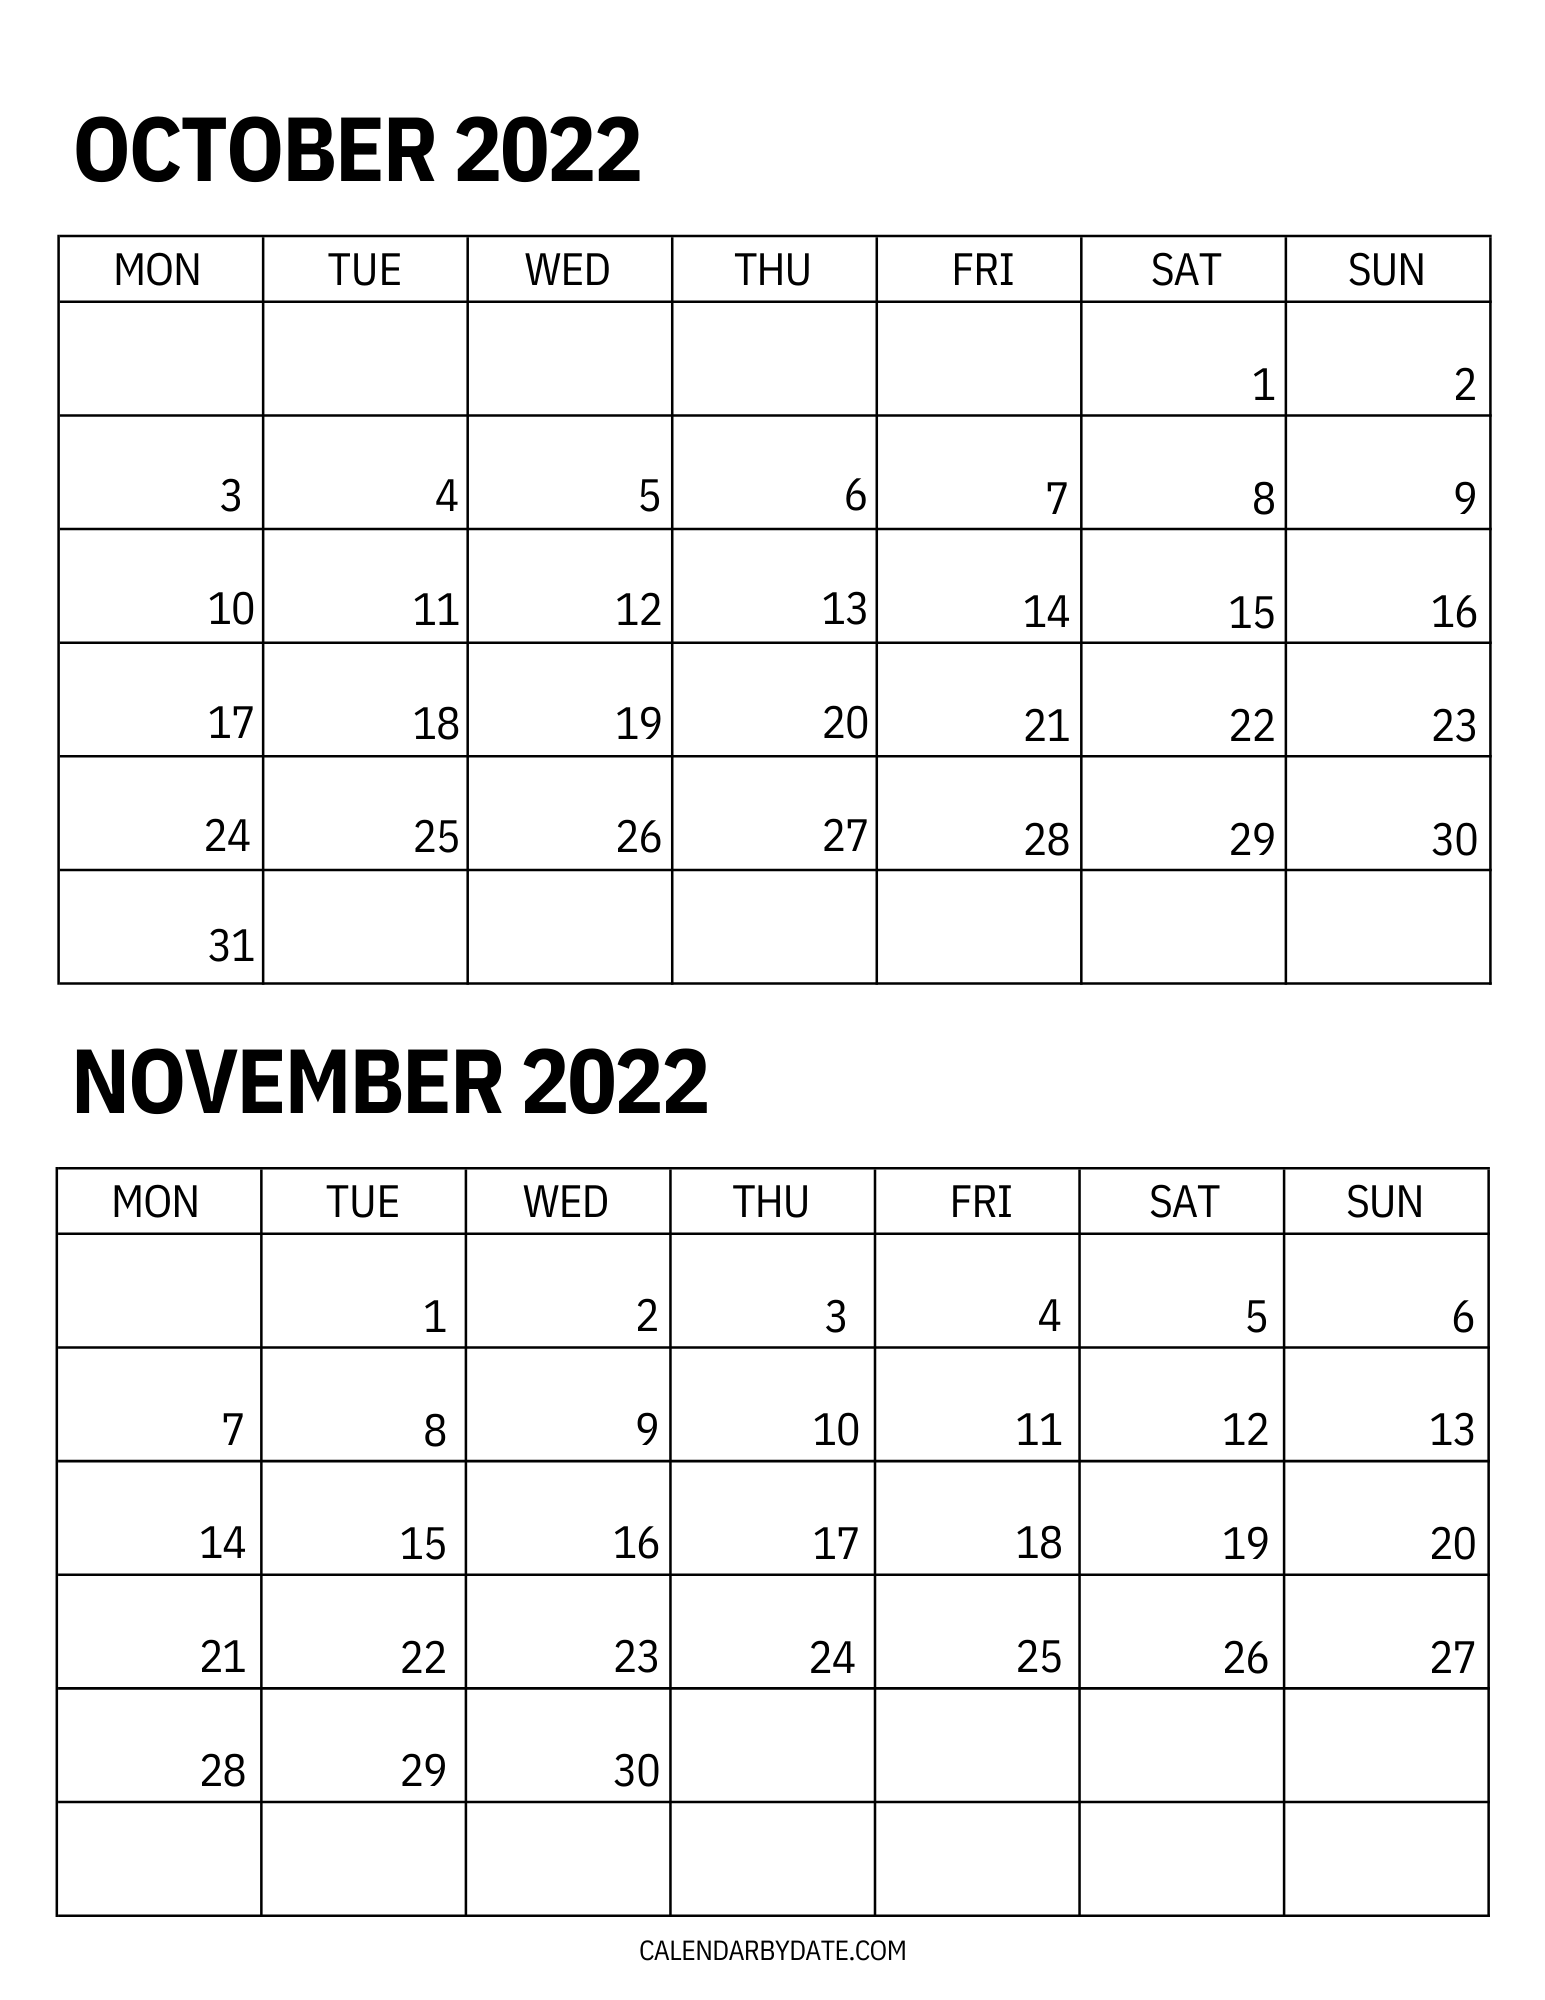 Calendar template for the months of October and November 2022 in a vertical layout on one page. Month dates are written in the calendar grid.